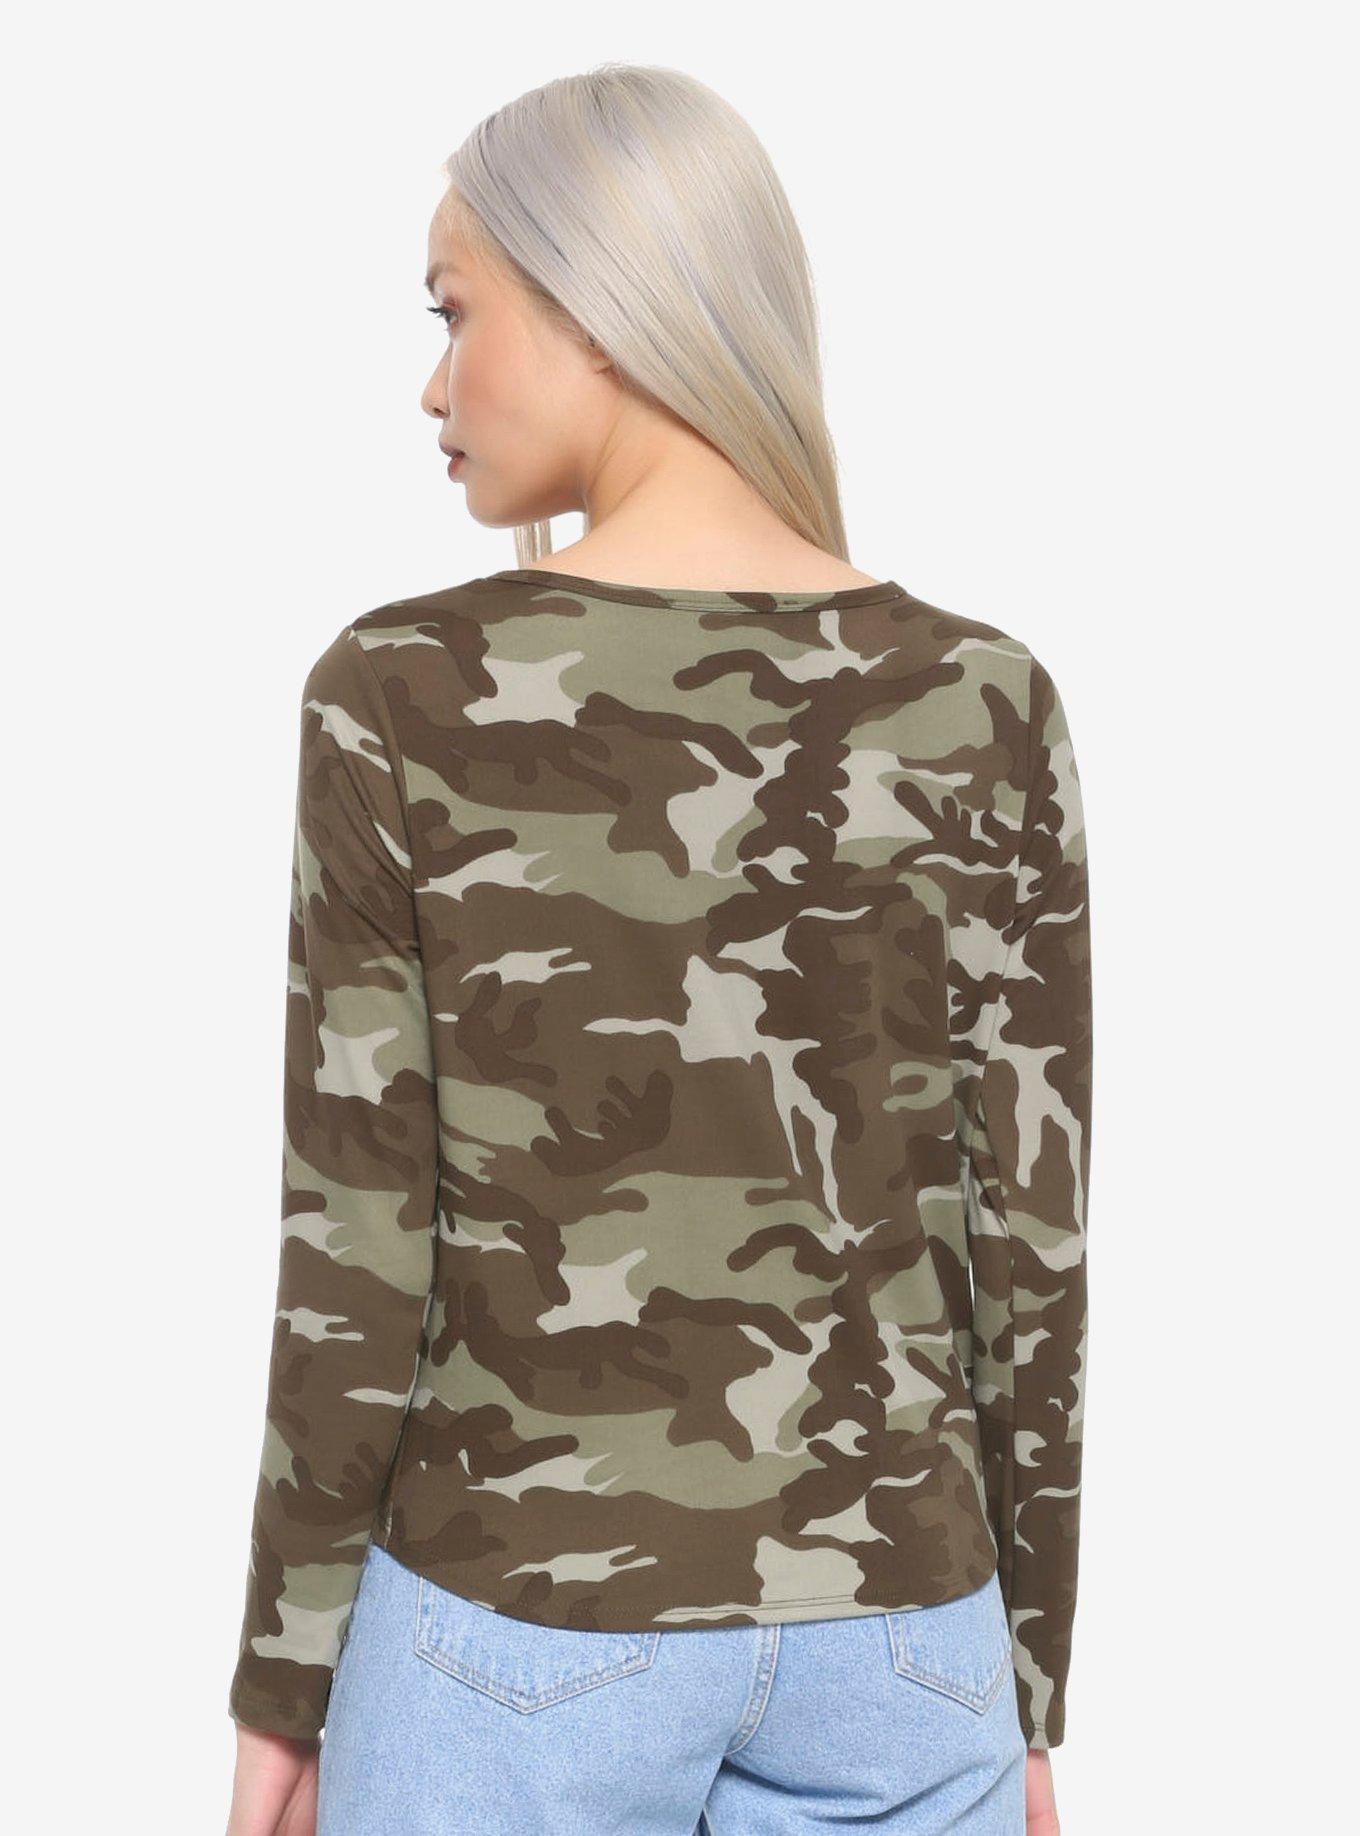 Green Camo Tie-Front Girls Top, ARMY GREEN, alternate